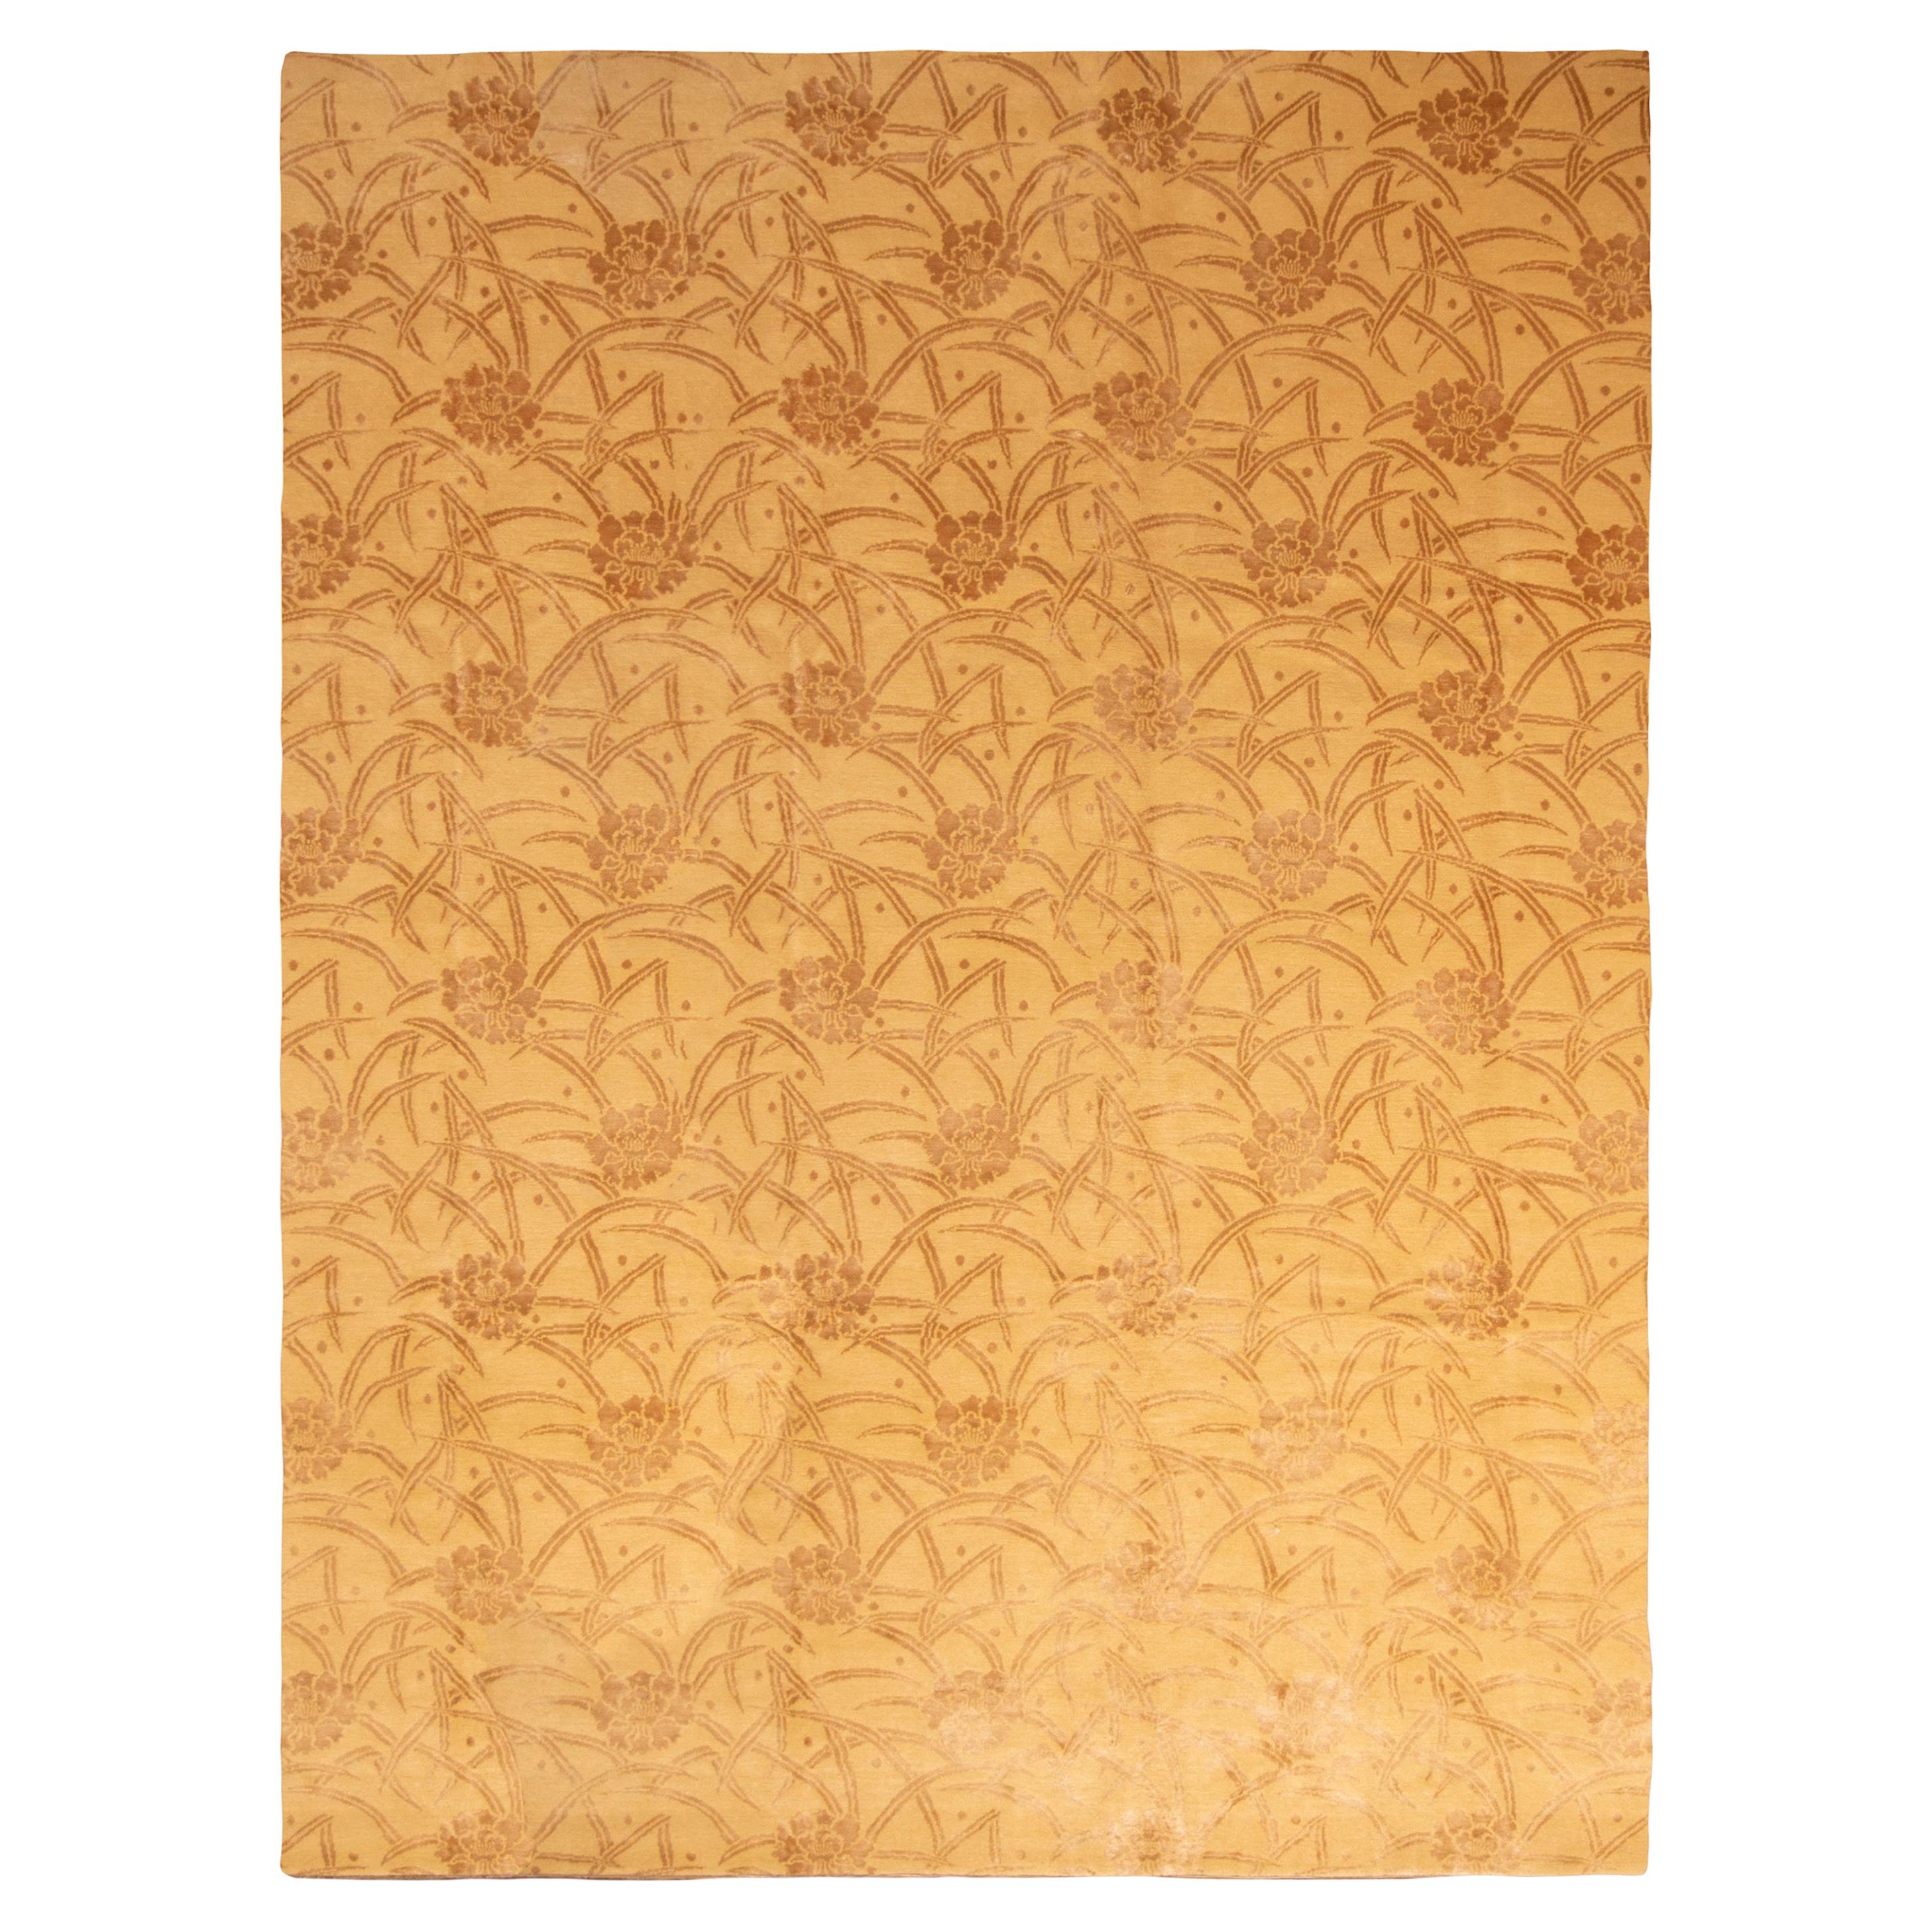 Rug & Kilim's New Bamboo in Wool Gold and Brown Floral Rug